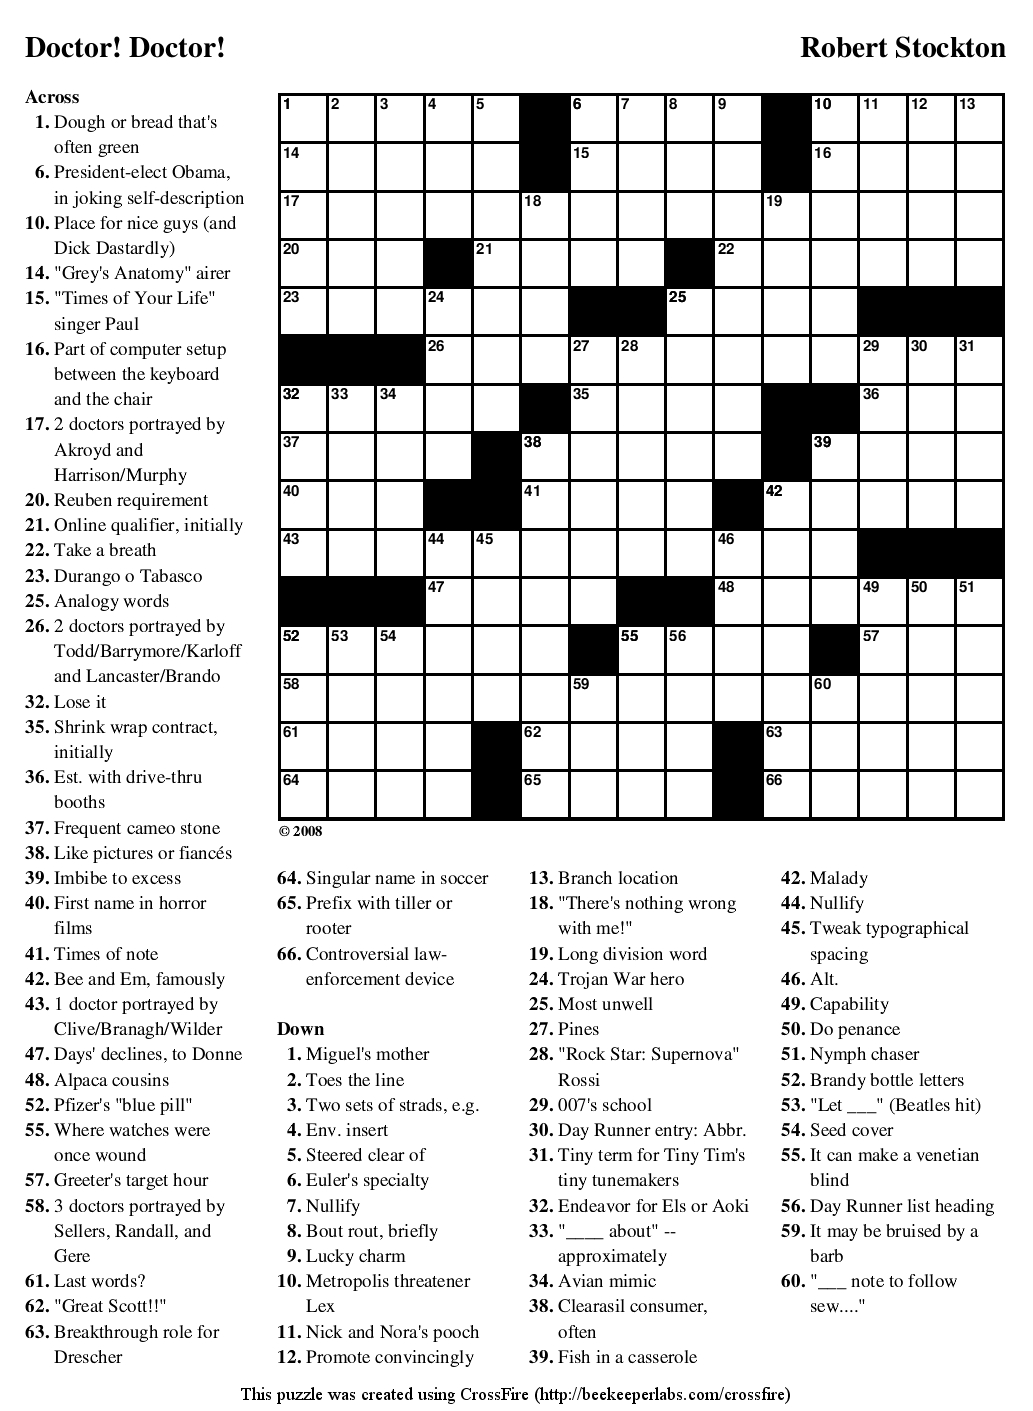 Crossword Puzzles Printable - Yahoo Image Search Results | Crossword - Create A Crossword Puzzle Free Printable